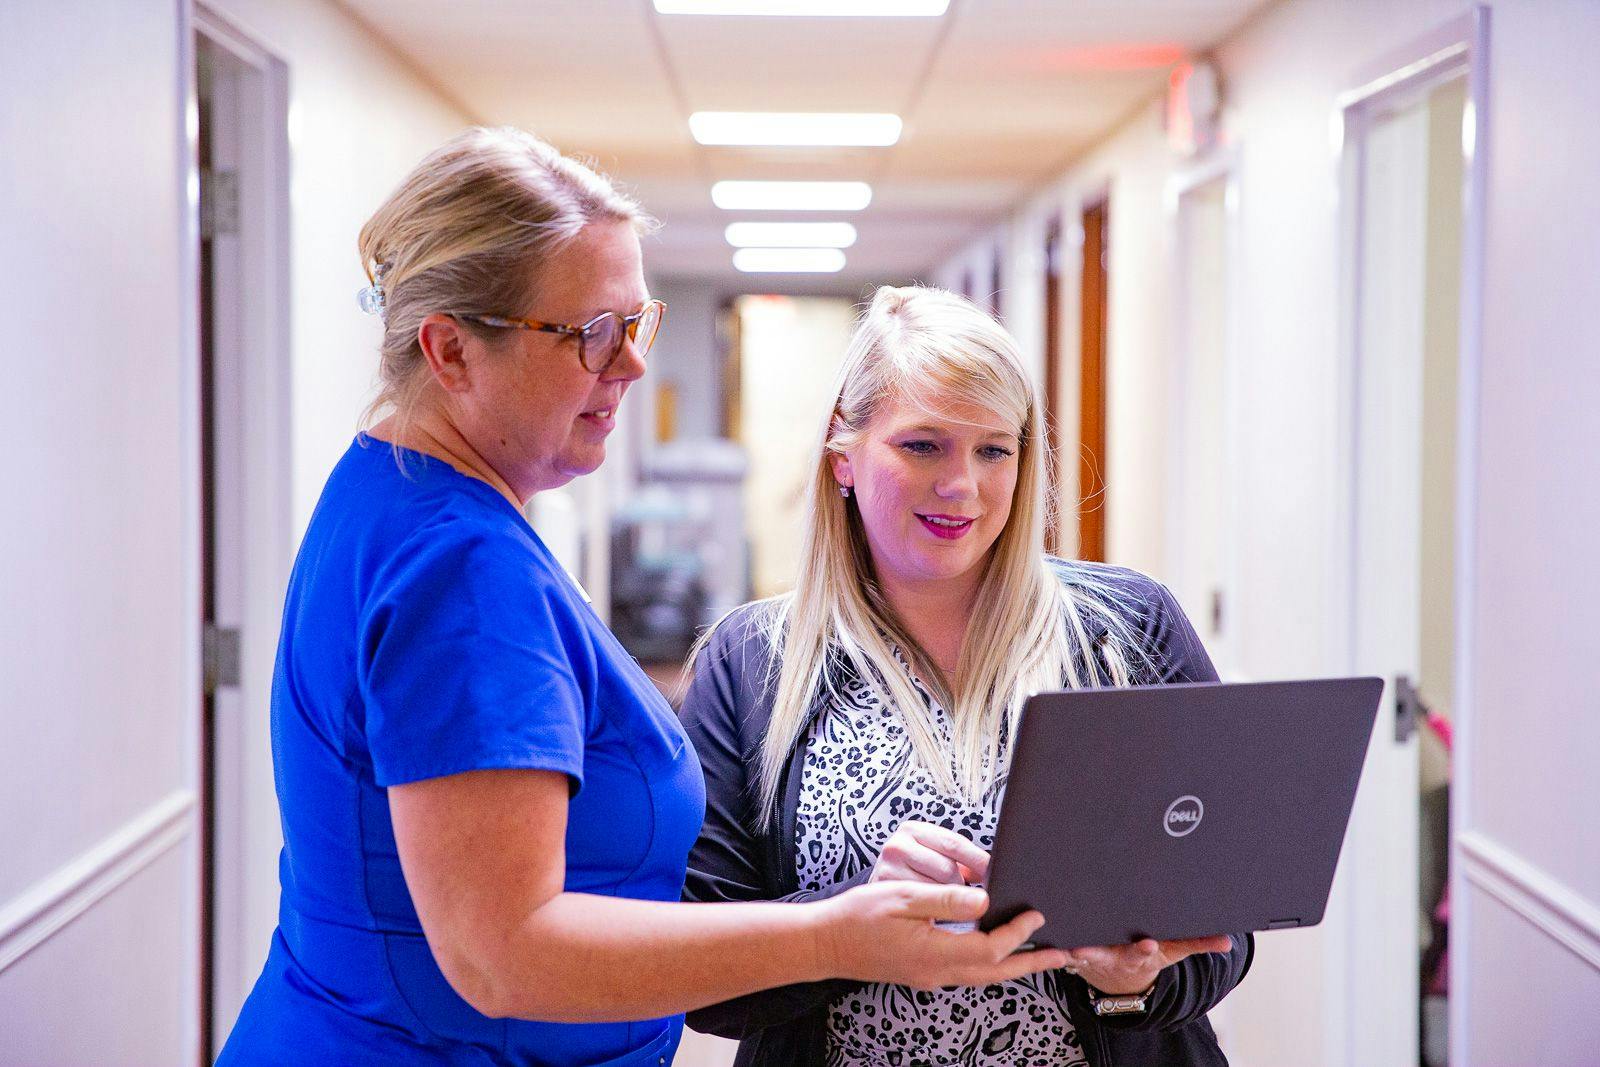 Jennifer Goldcamp, RN and director of nursing, and Lori Rose, RN, go over vaccine inventory on a computer.